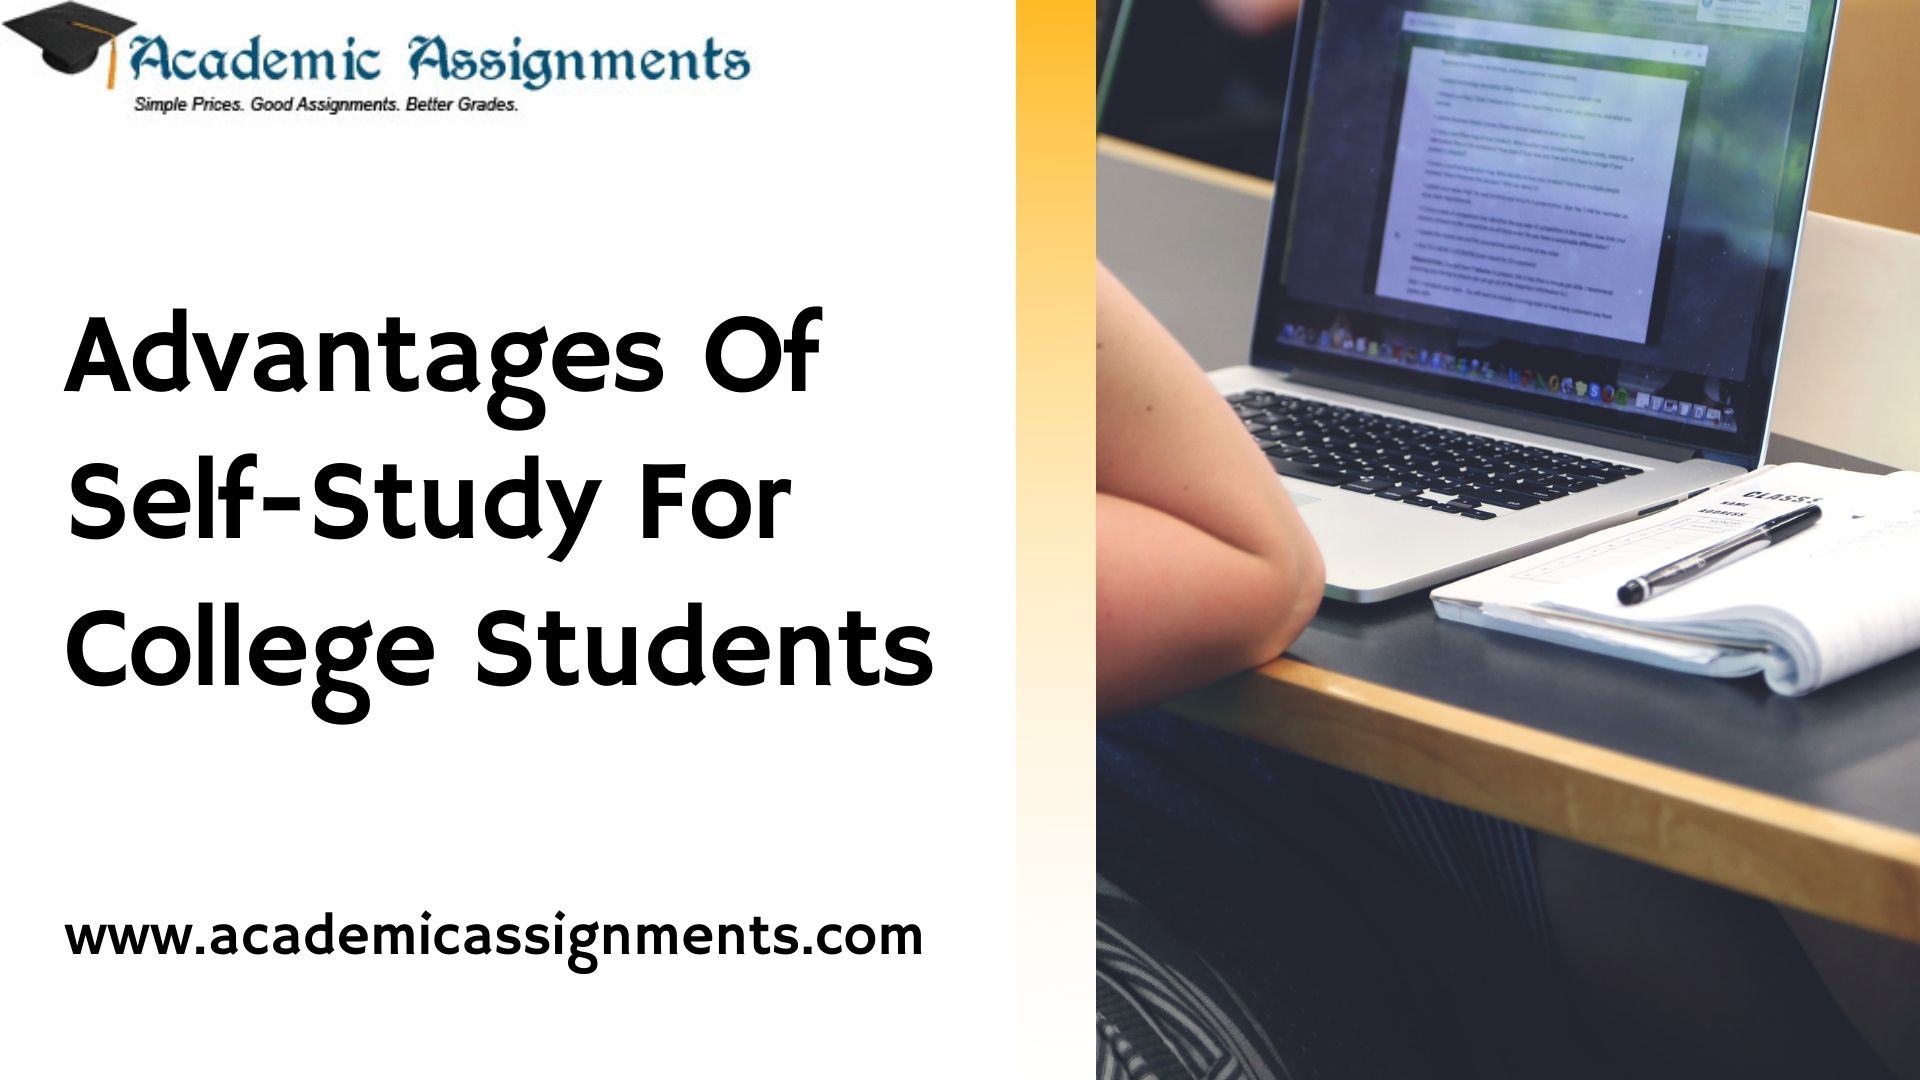 Advantages Of Self-Study For College Students